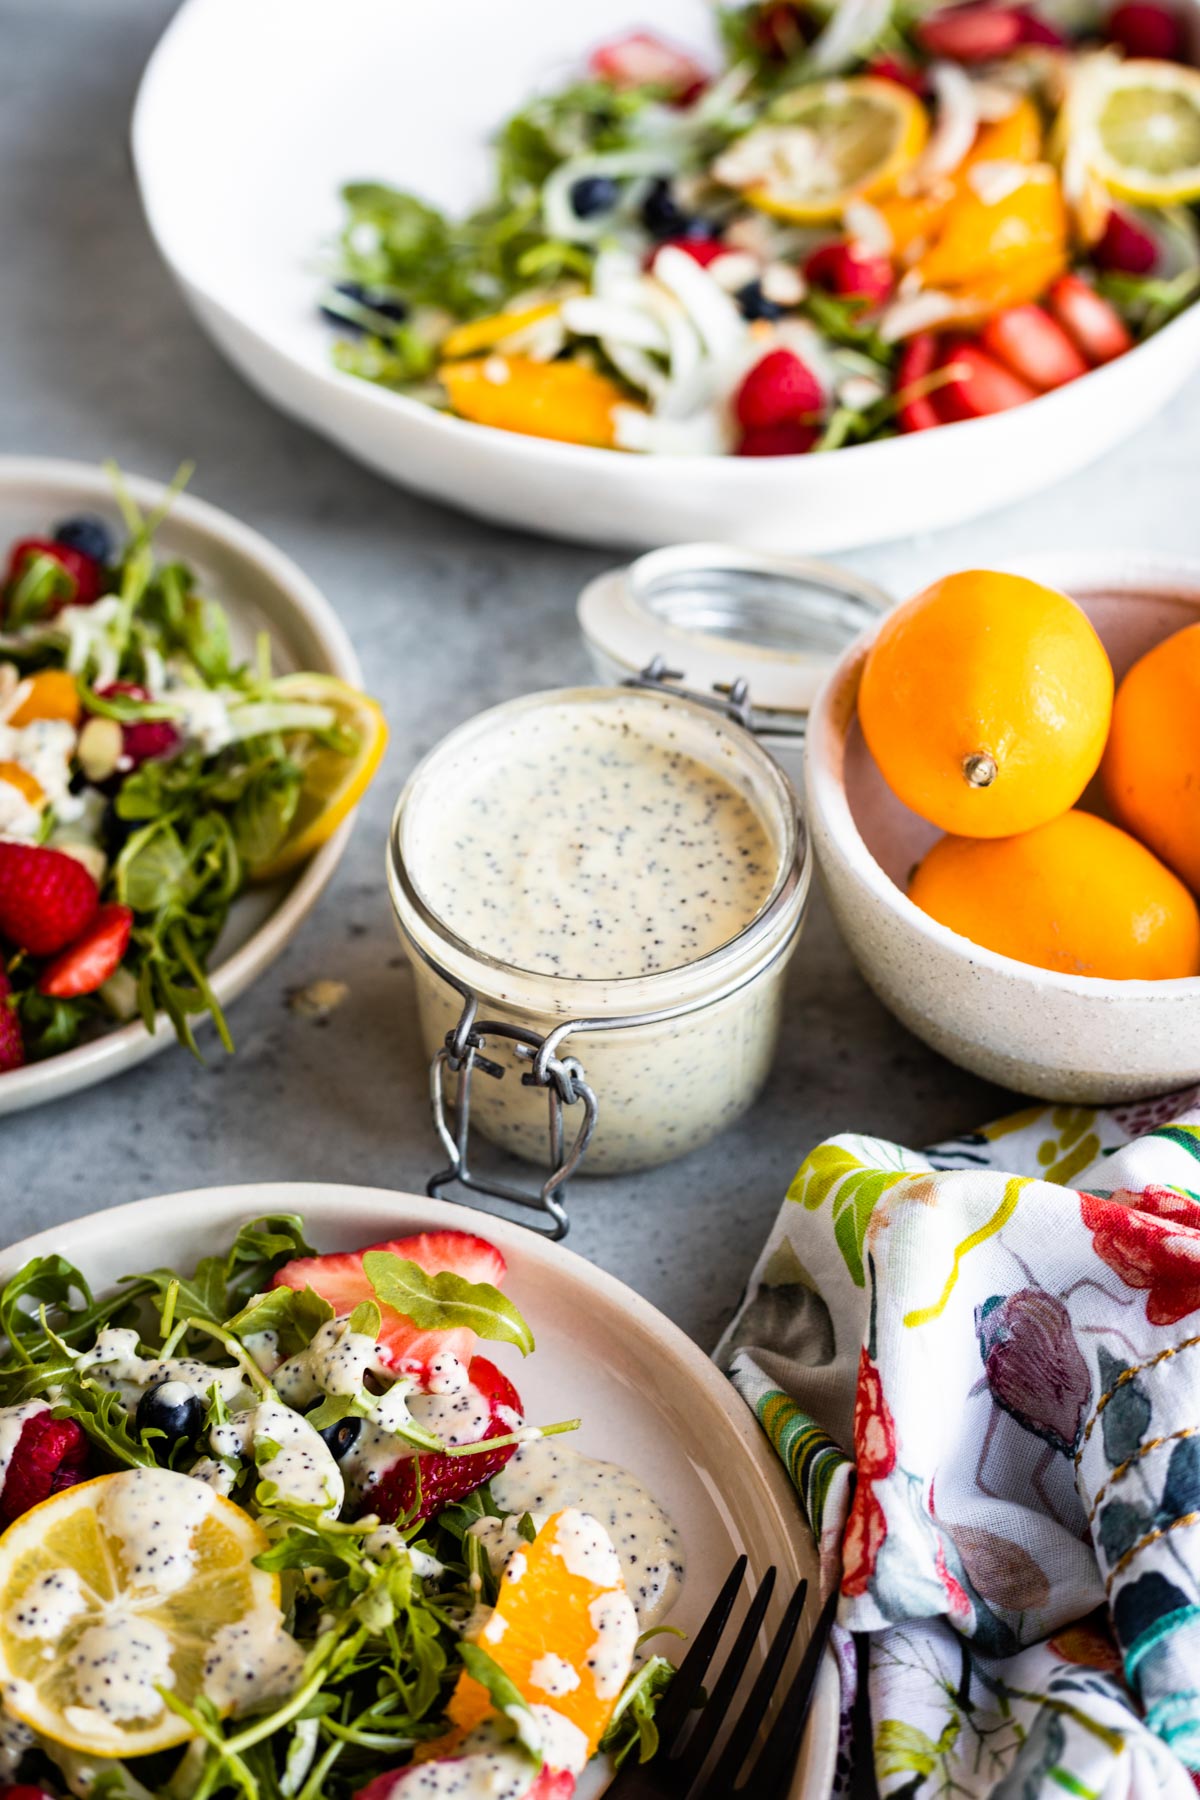 homemade dressing with poppy seeds on top of a fruit and arugula salad as well as in a glass jar next to a bowl of meyer lemons.